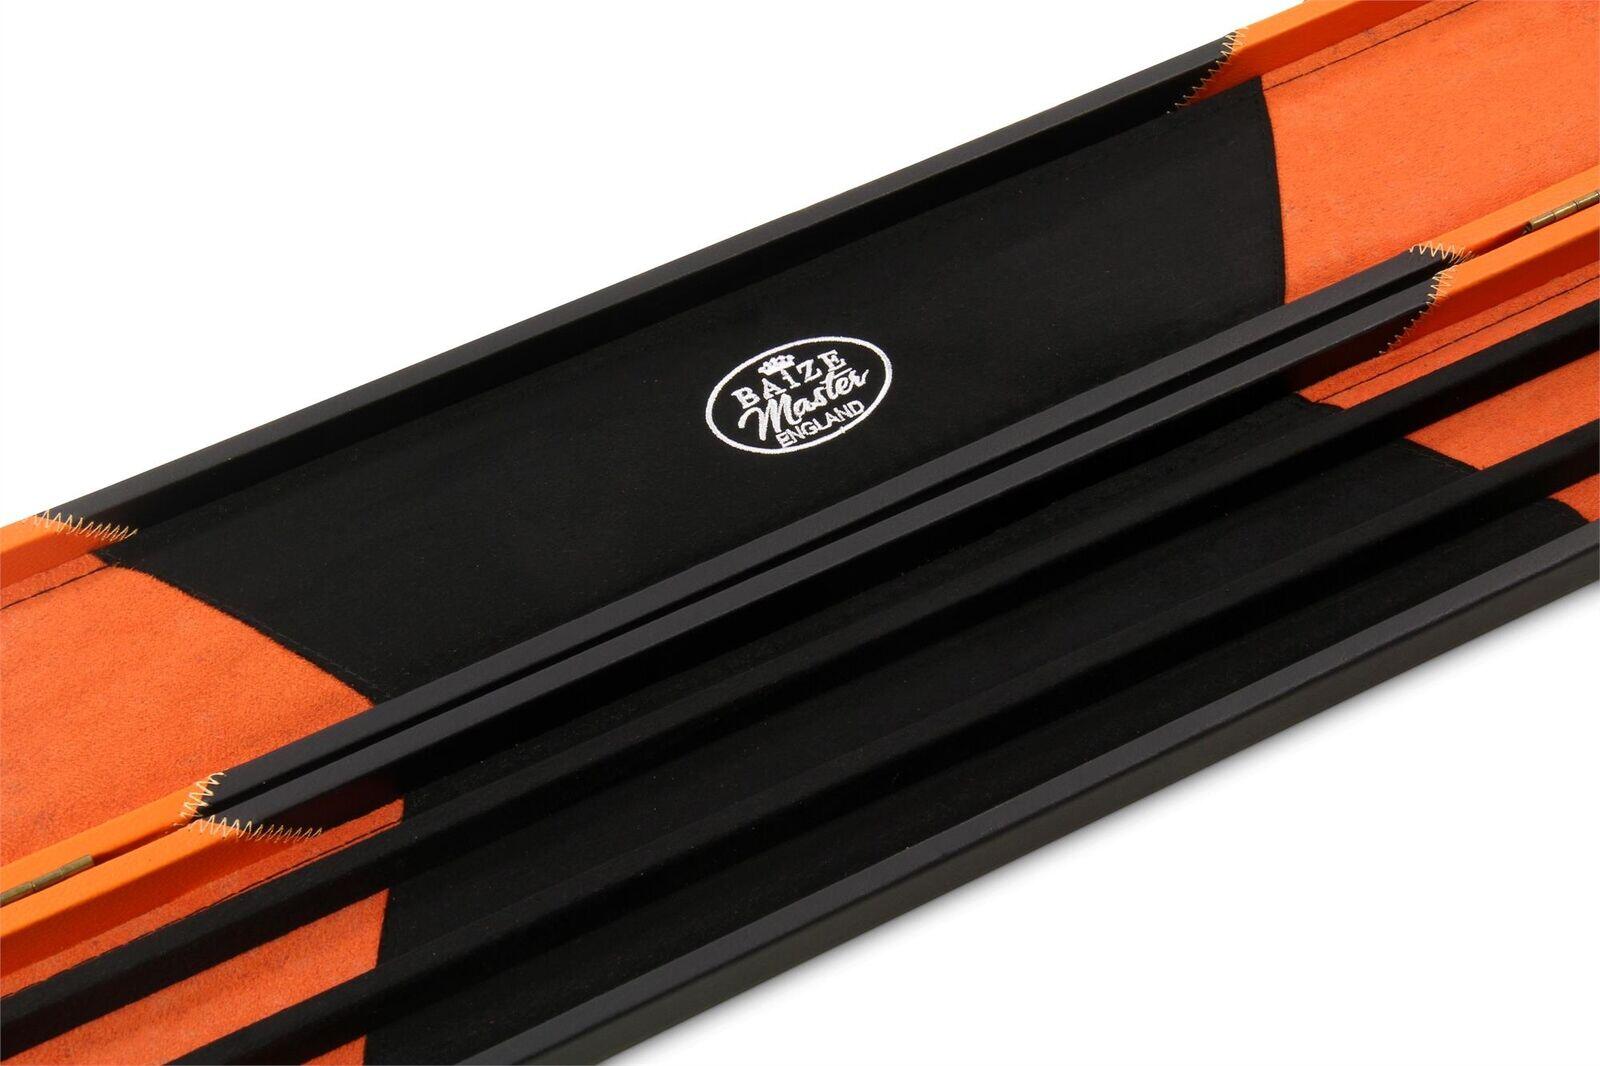 Baize Master 1 Piece WIDE ORANGE ARROW Snooker Pool Cue Case - Holds 3 Cues 6/7